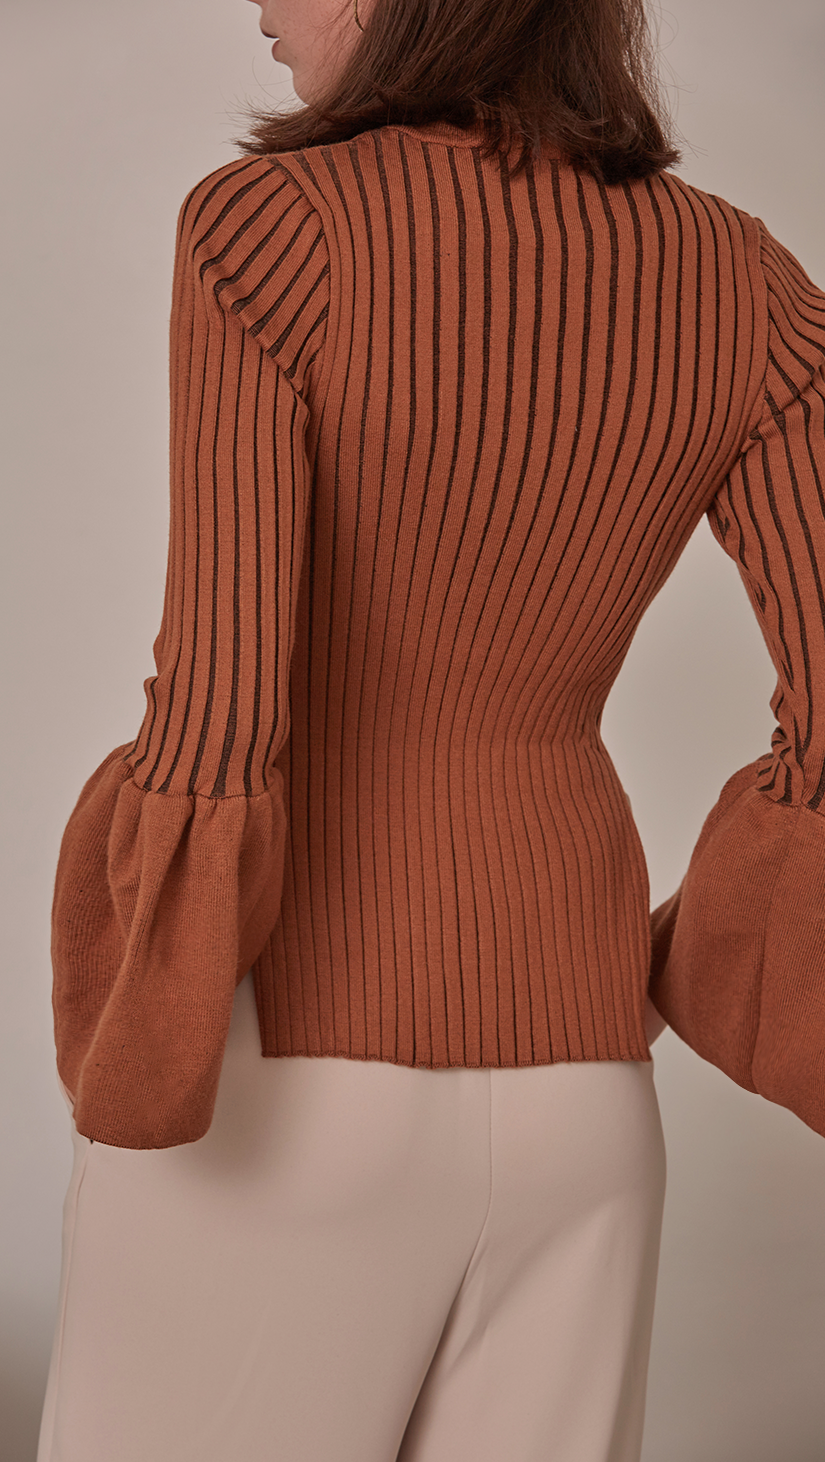 Etre Sweater in Brown. Oversized puffs on exaggerated cuffs, rib knit in the avant-grade silhouette. Voluminous bell sleeves in cropped length top with side slit. Rounded hem. Super soft feel. Designed to skim the body. The slim fit makes it a natural for laye